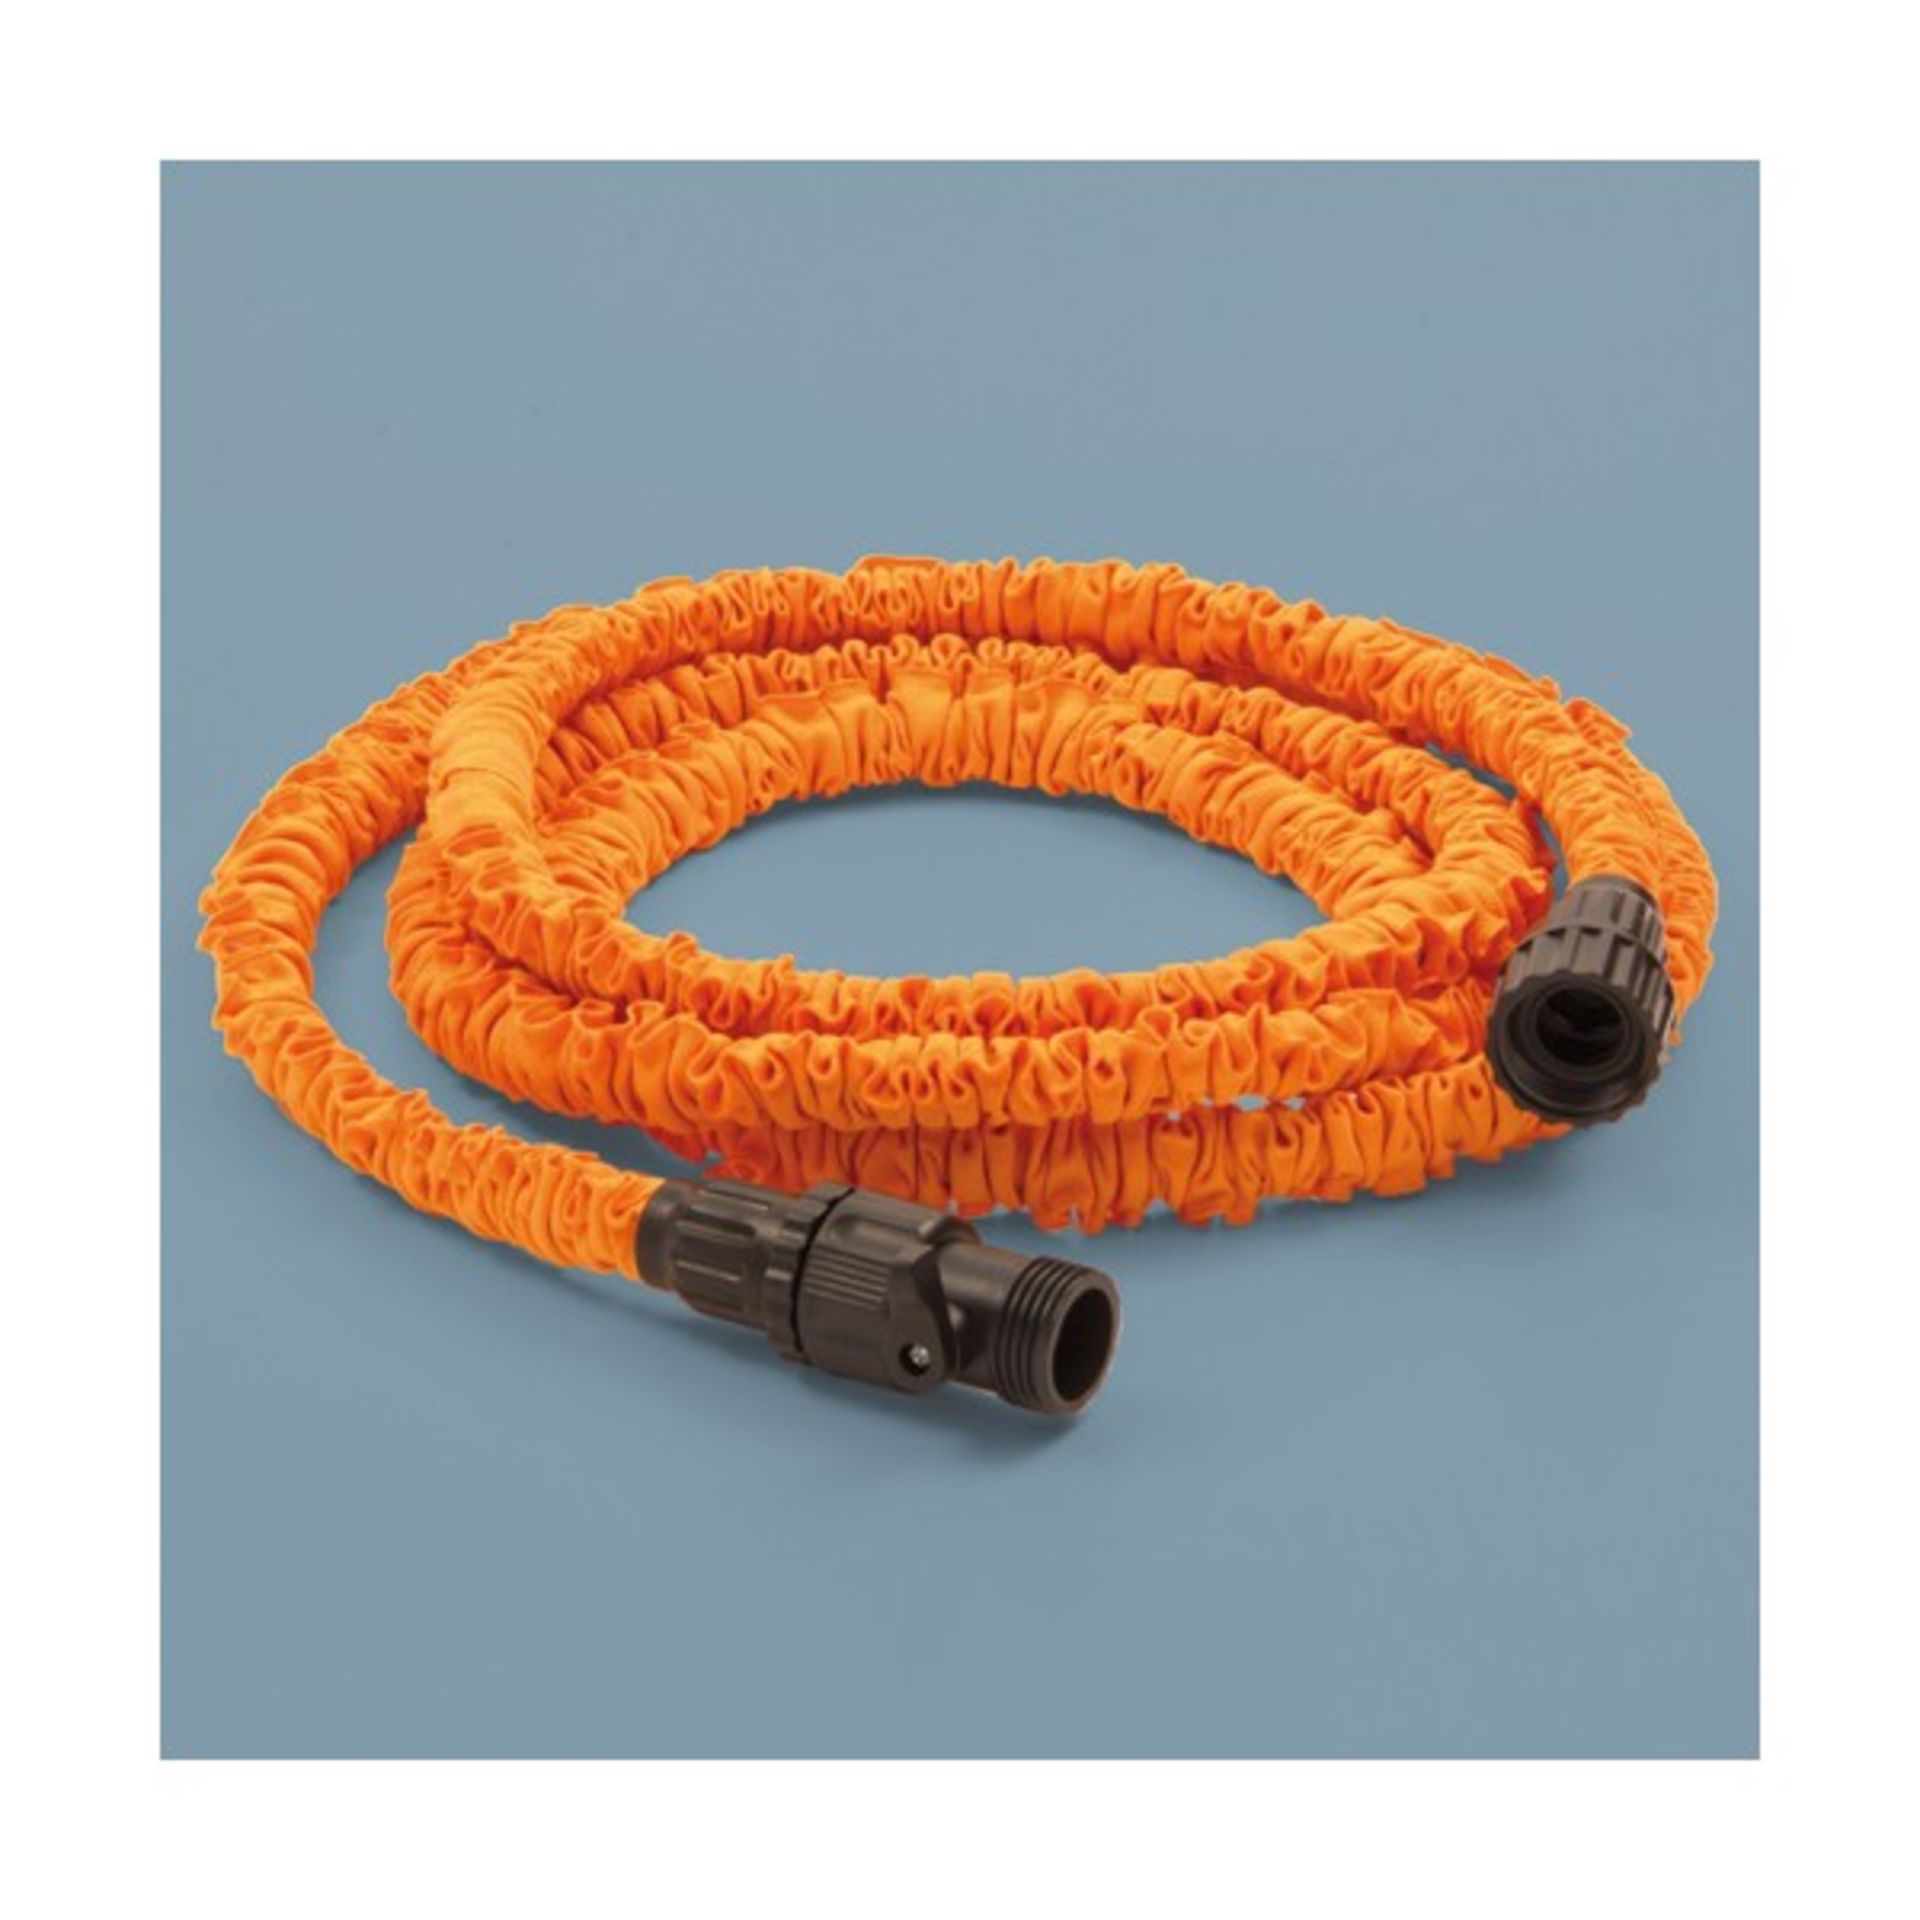 V *TRADE QTY* Brand New 25ft Extendable Hose ISP £19.99 Argos similar X 5 YOUR BID PRICE TO BE